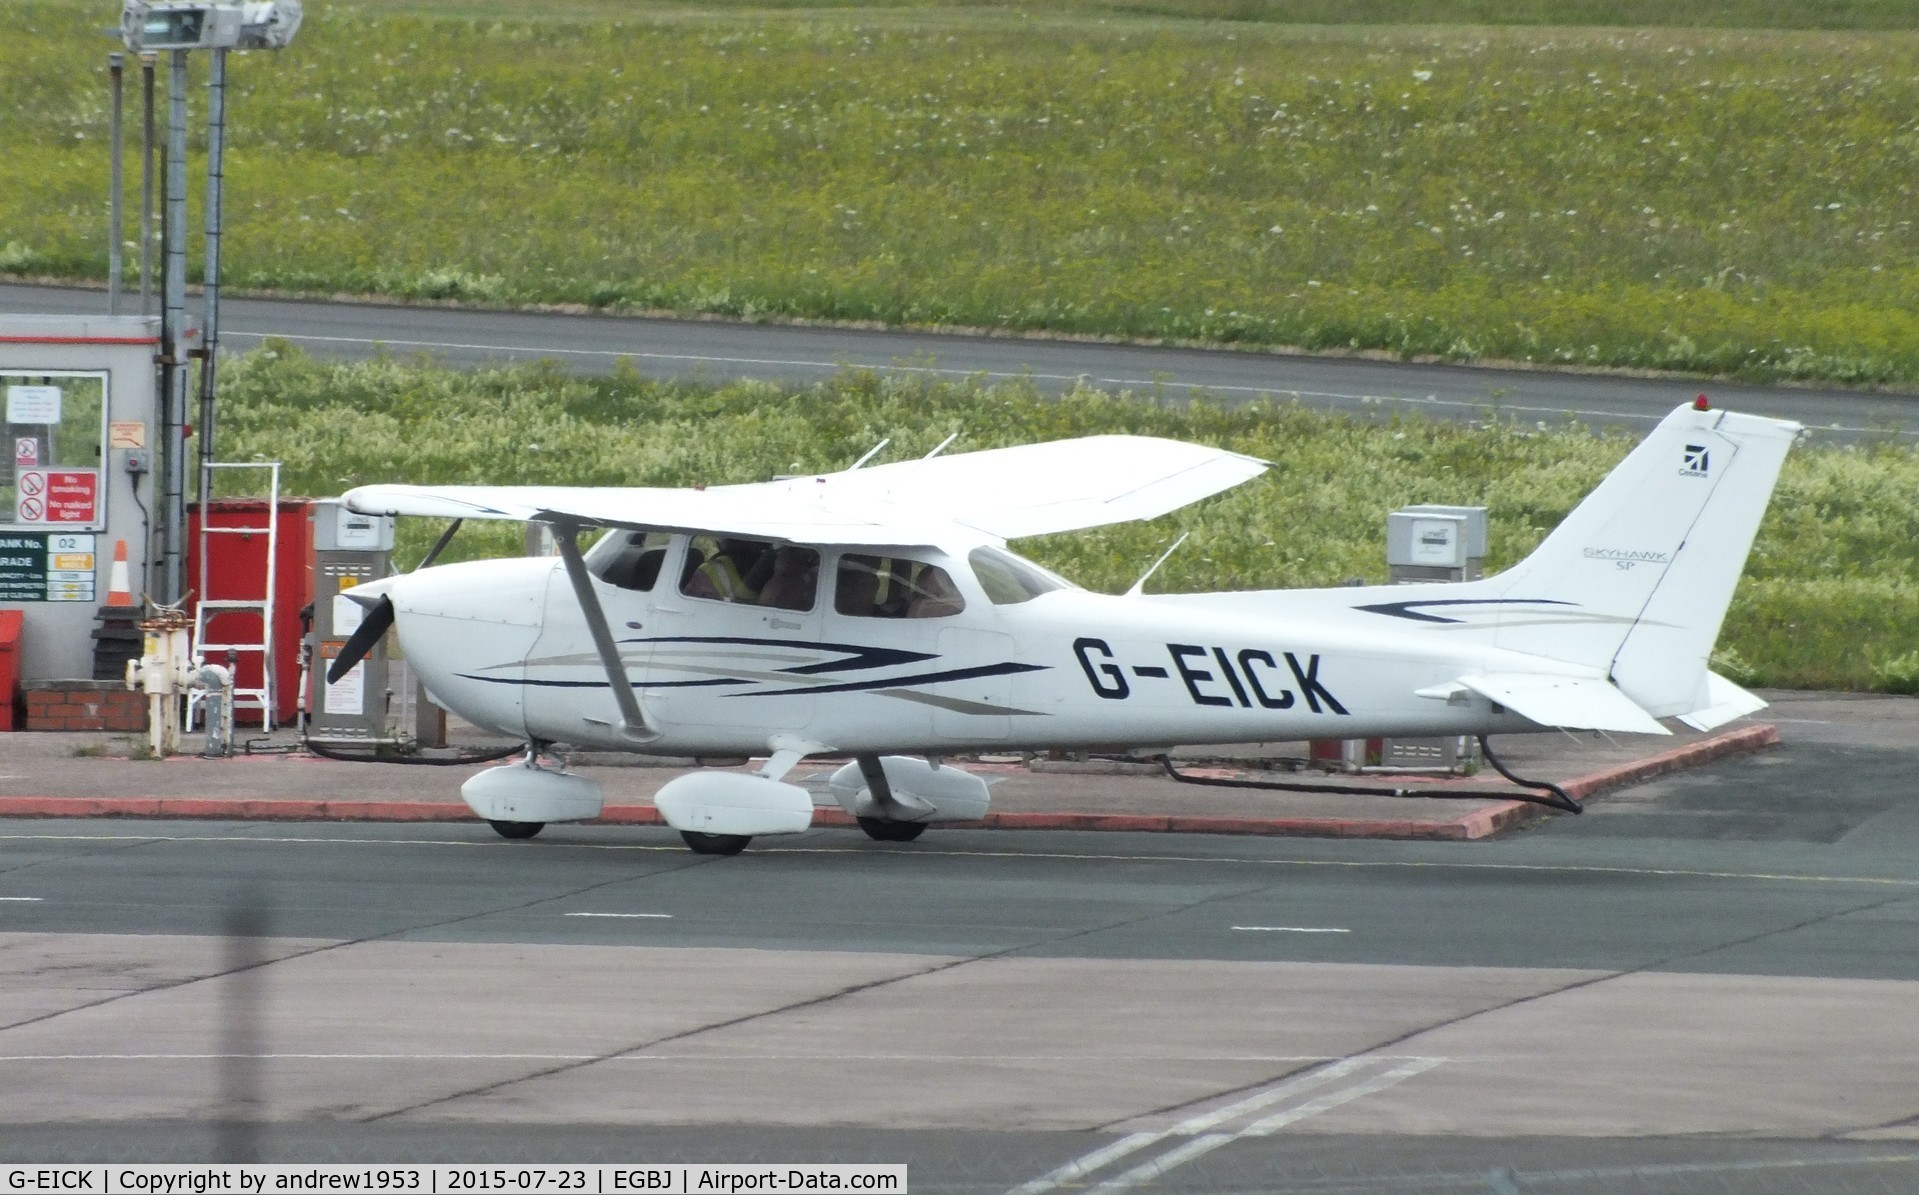 G-EICK, 2007 Cessna 172S Skyhawk SP C/N 172S10426, G-EICK at Gloucestershire Airport.